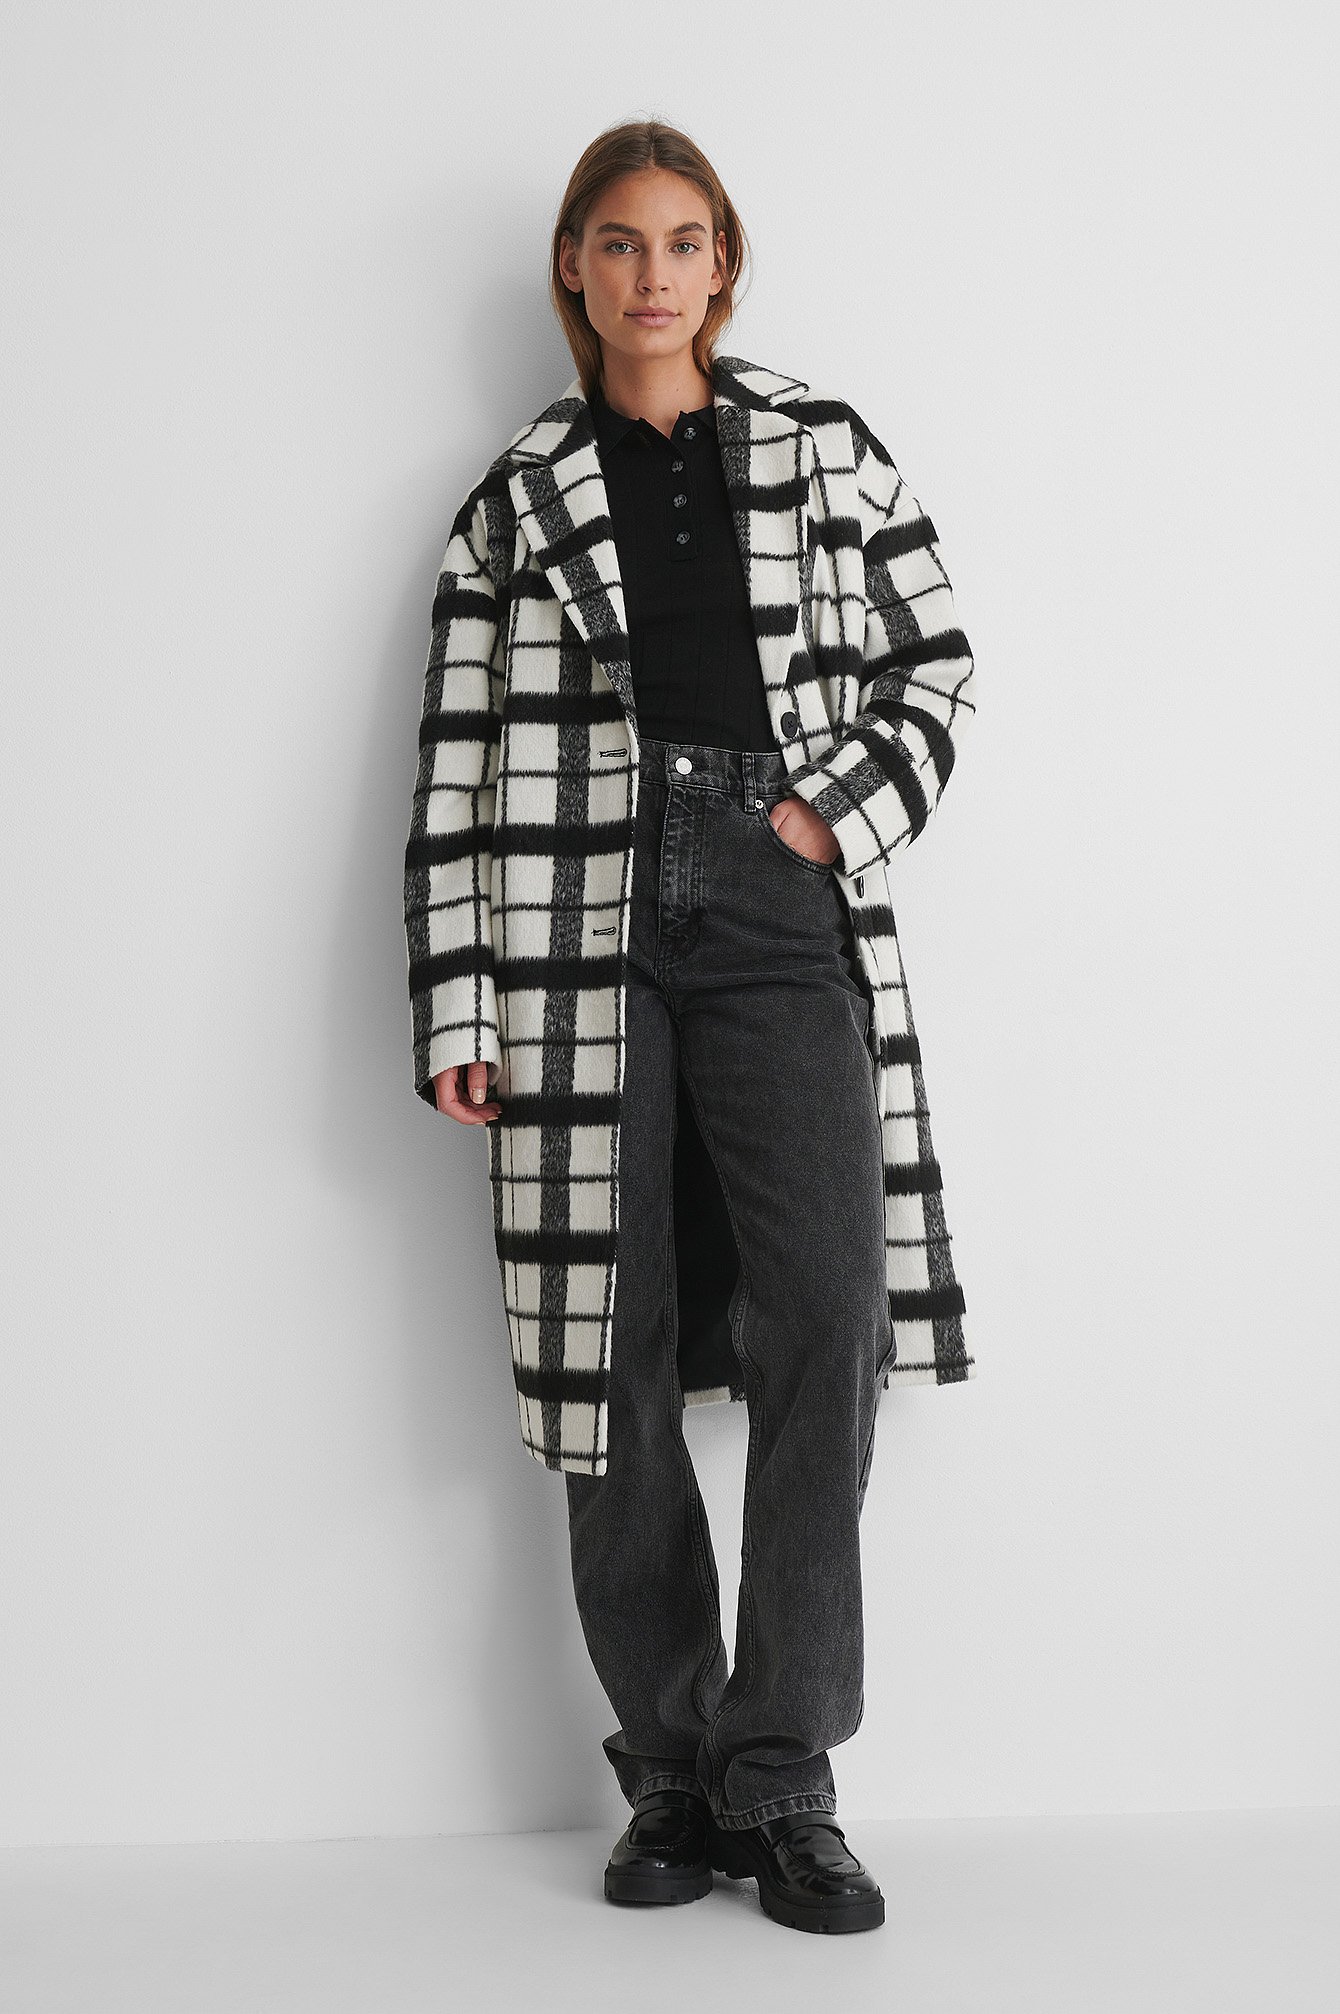 Checked Dropped Shoulder Coat with Grey Denim and Loafers.